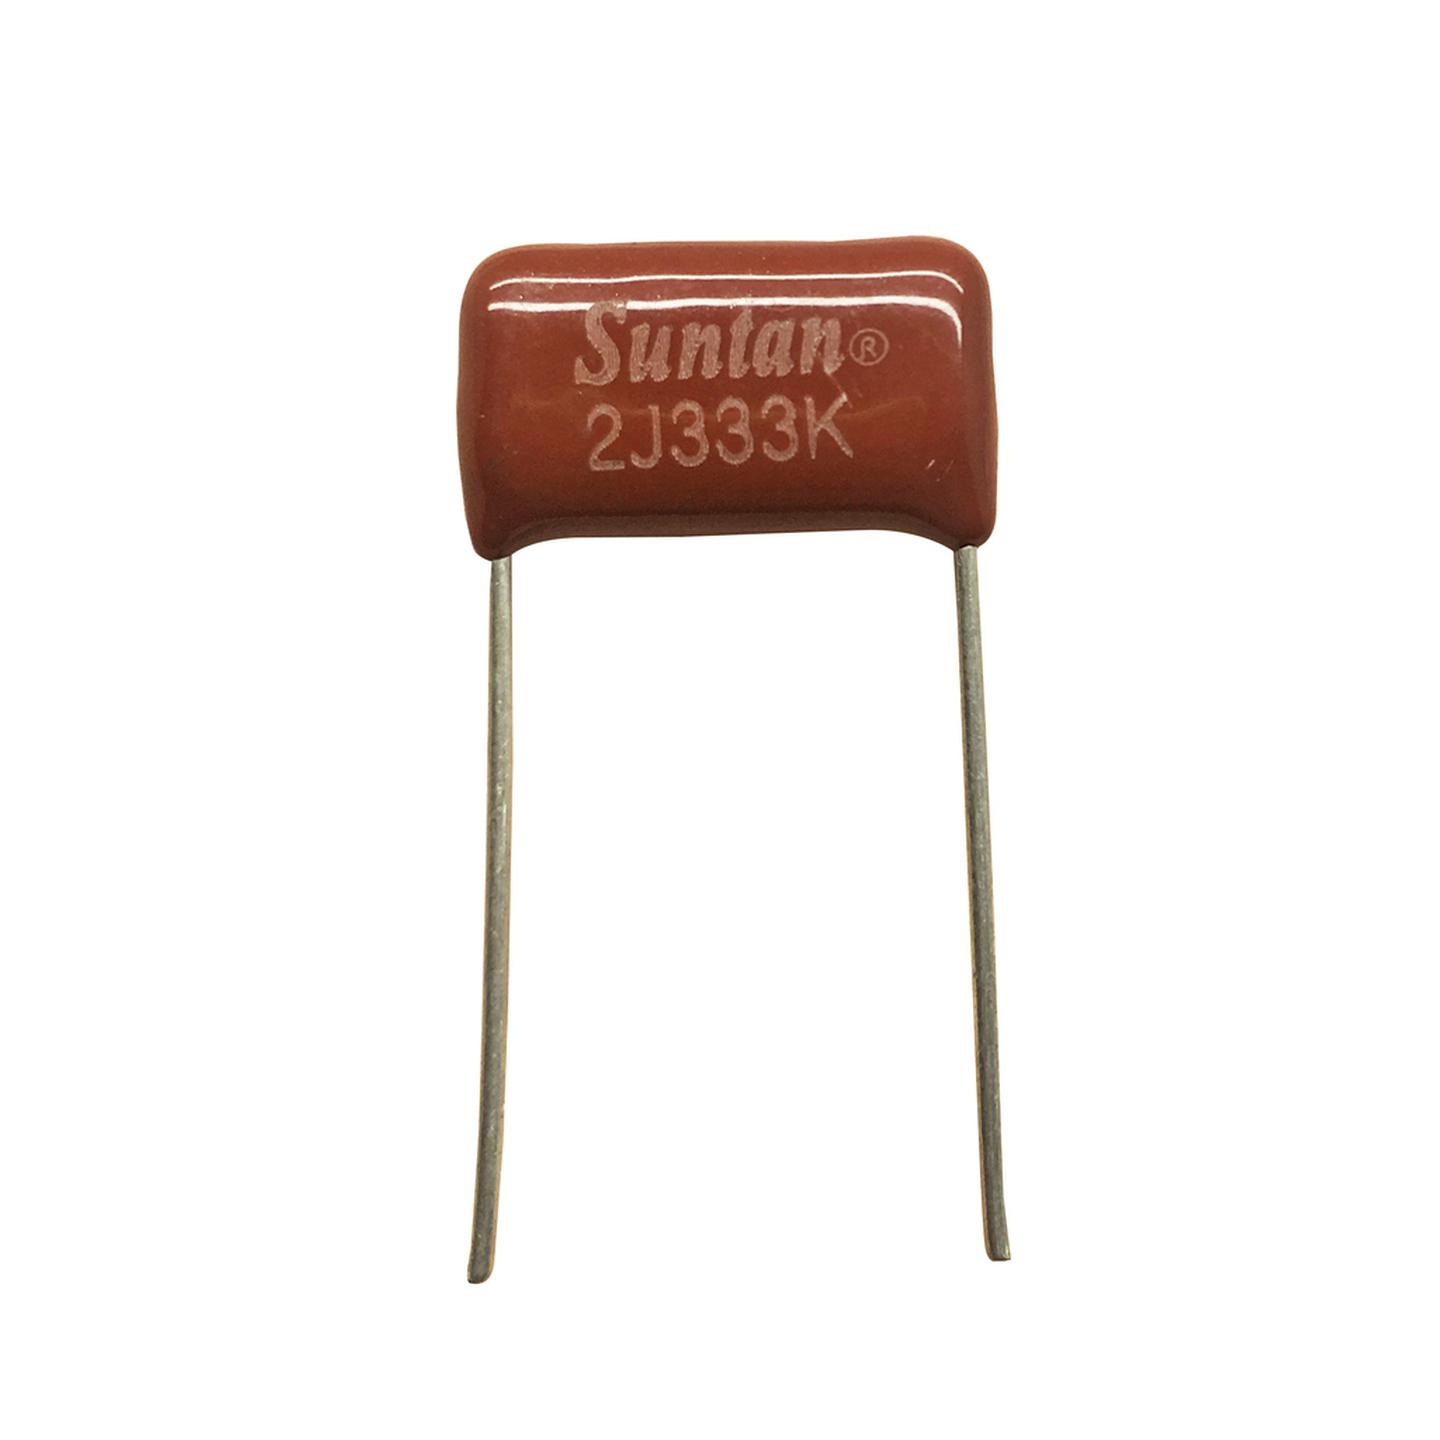 33nF 630VDC Polyester Capacitor